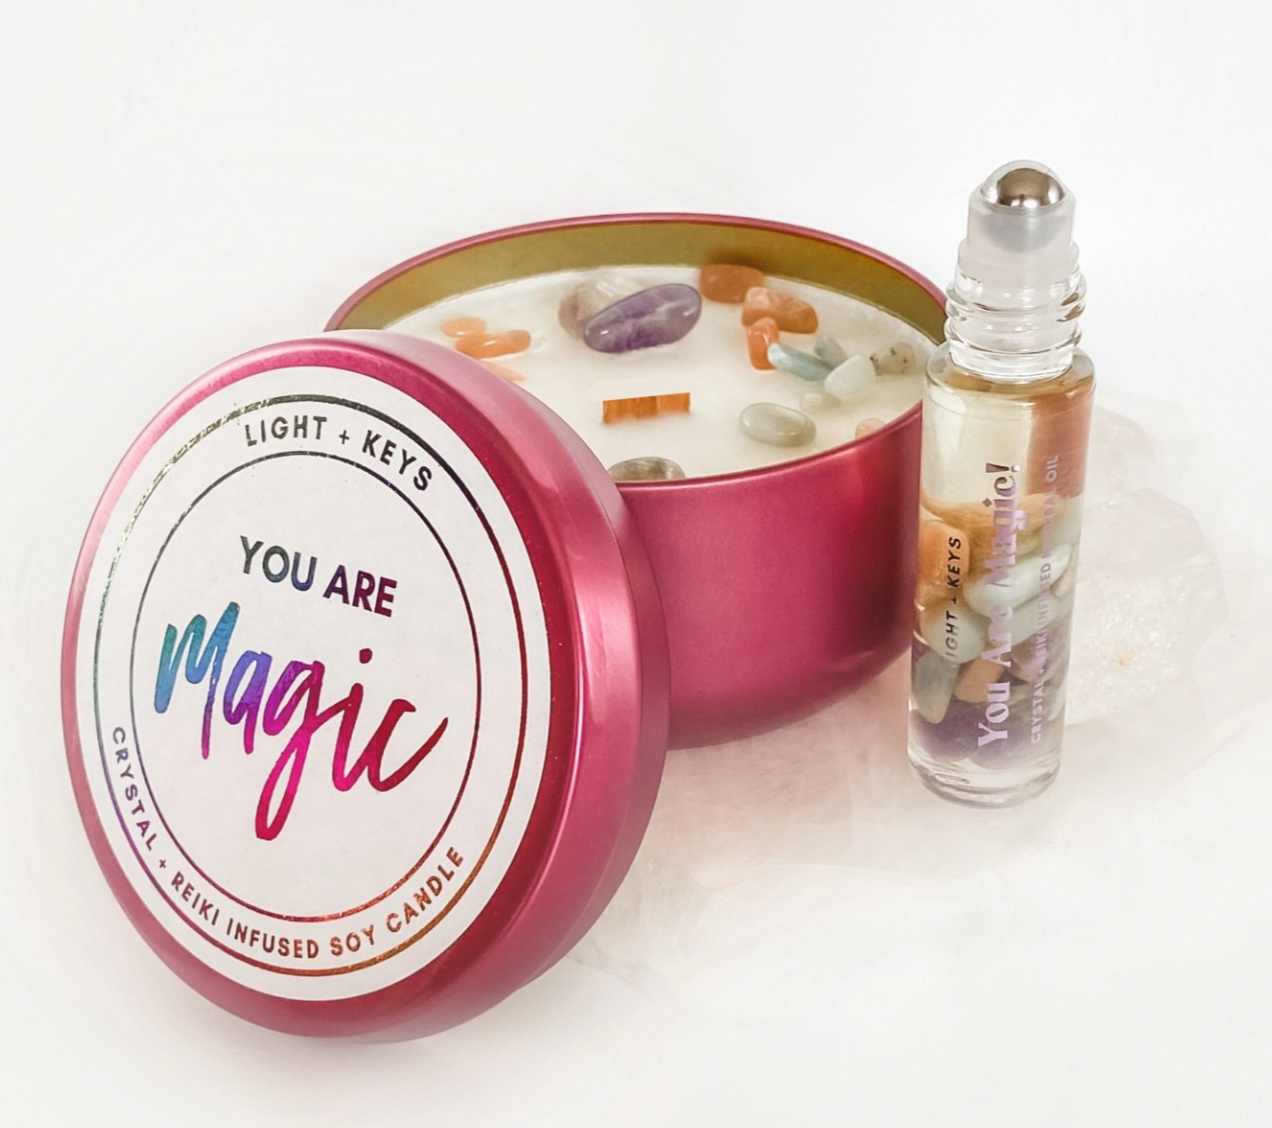 Oil Roller with Crystals - YOU ARE MAGIC!